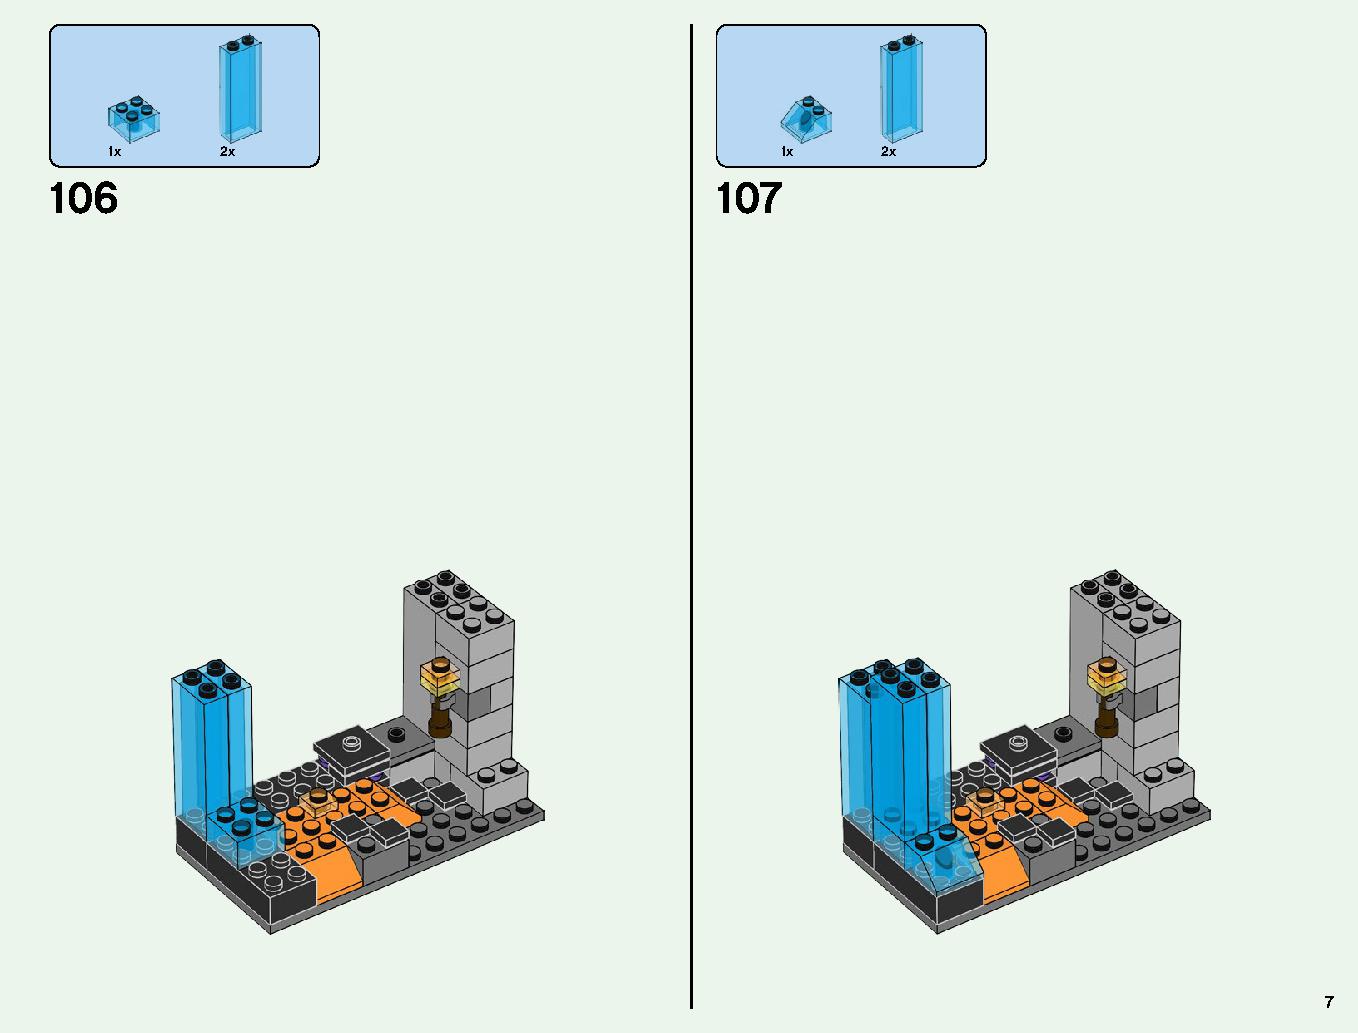 The Bedrock Adventures 21147 LEGO information LEGO instructions 7 page